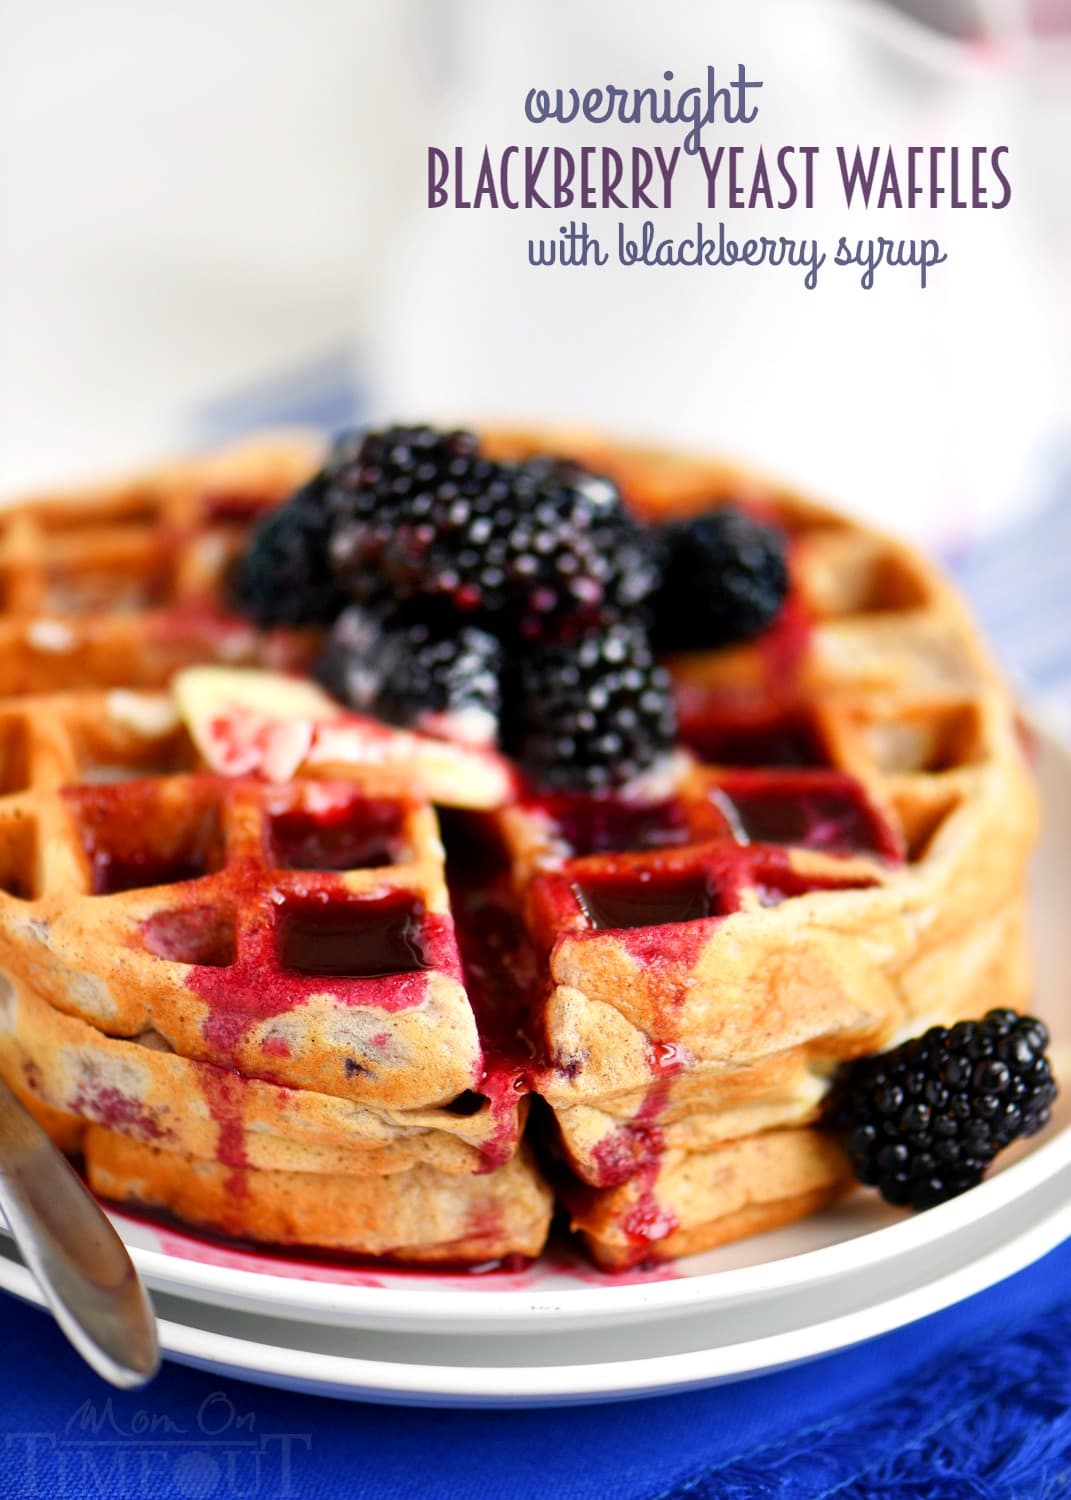 Better-for-you Overnight Blackberry Yeast Waffles with blackberry syrup - breakfast has never looked so good! Five minutes of work the night before delivers the most amazingly delicious waffles the next morning!